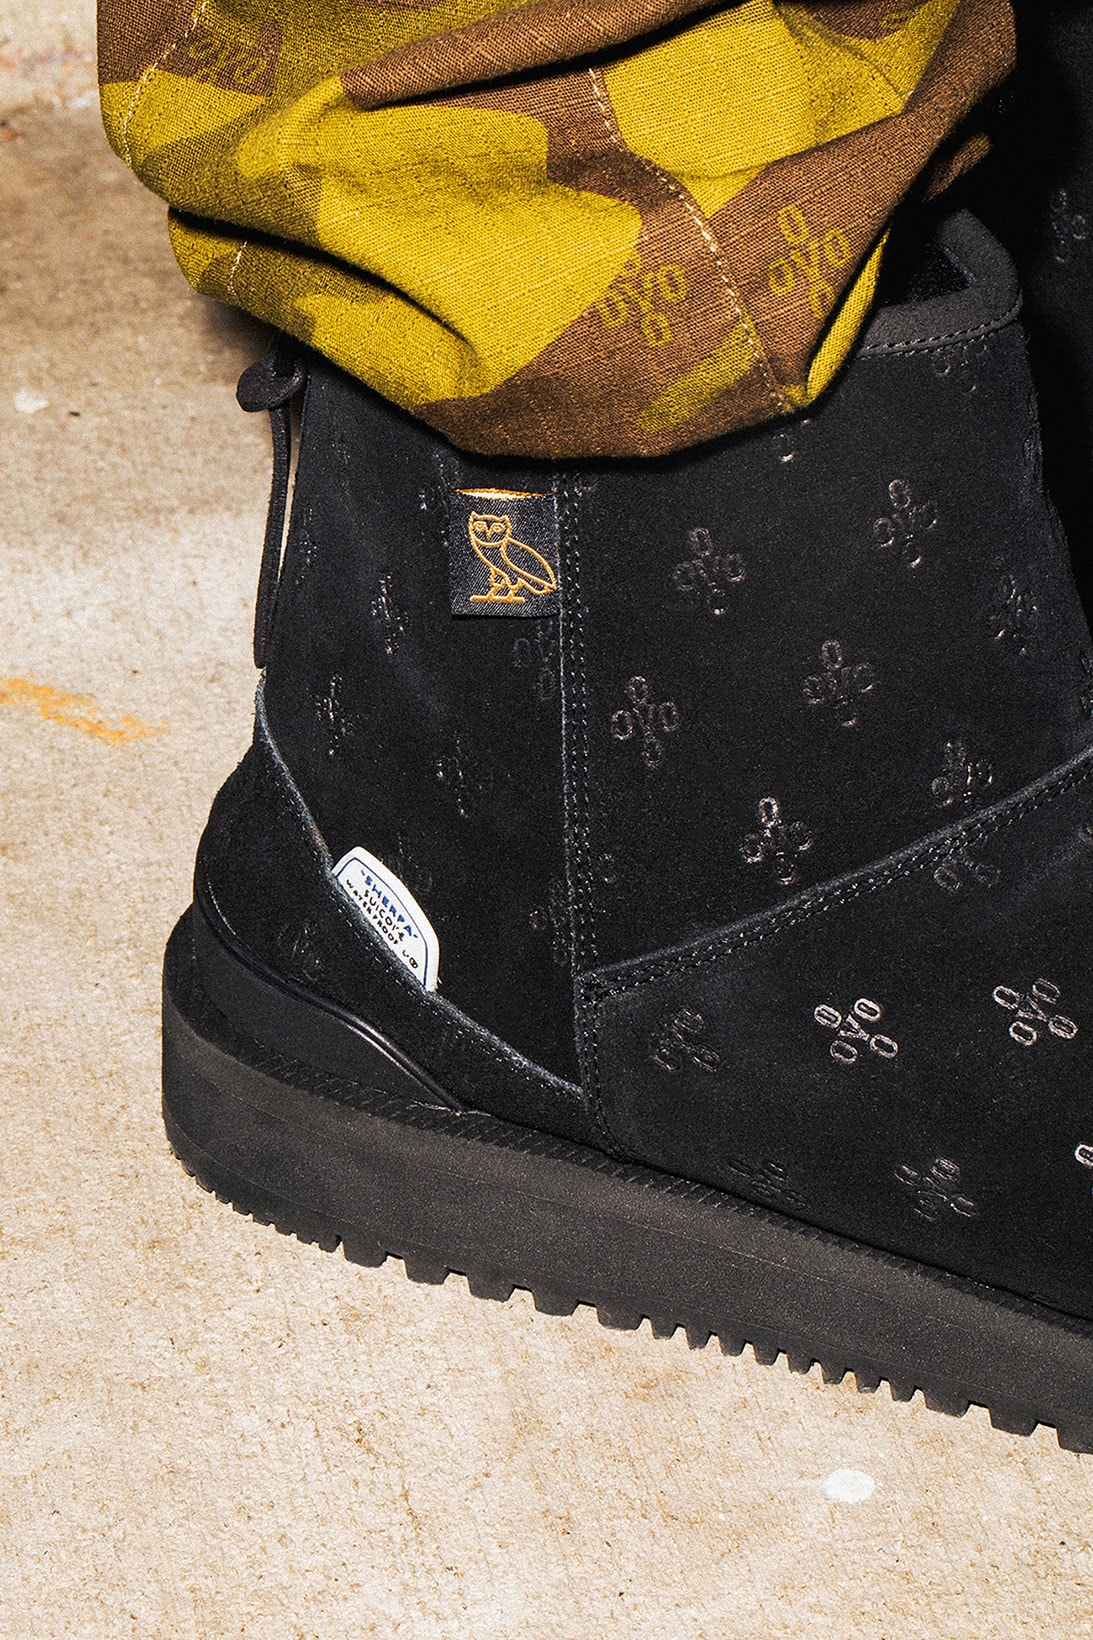 Drake OVO October's Very Own Suicoke Collaboration ELS-M2AB Mid Boots